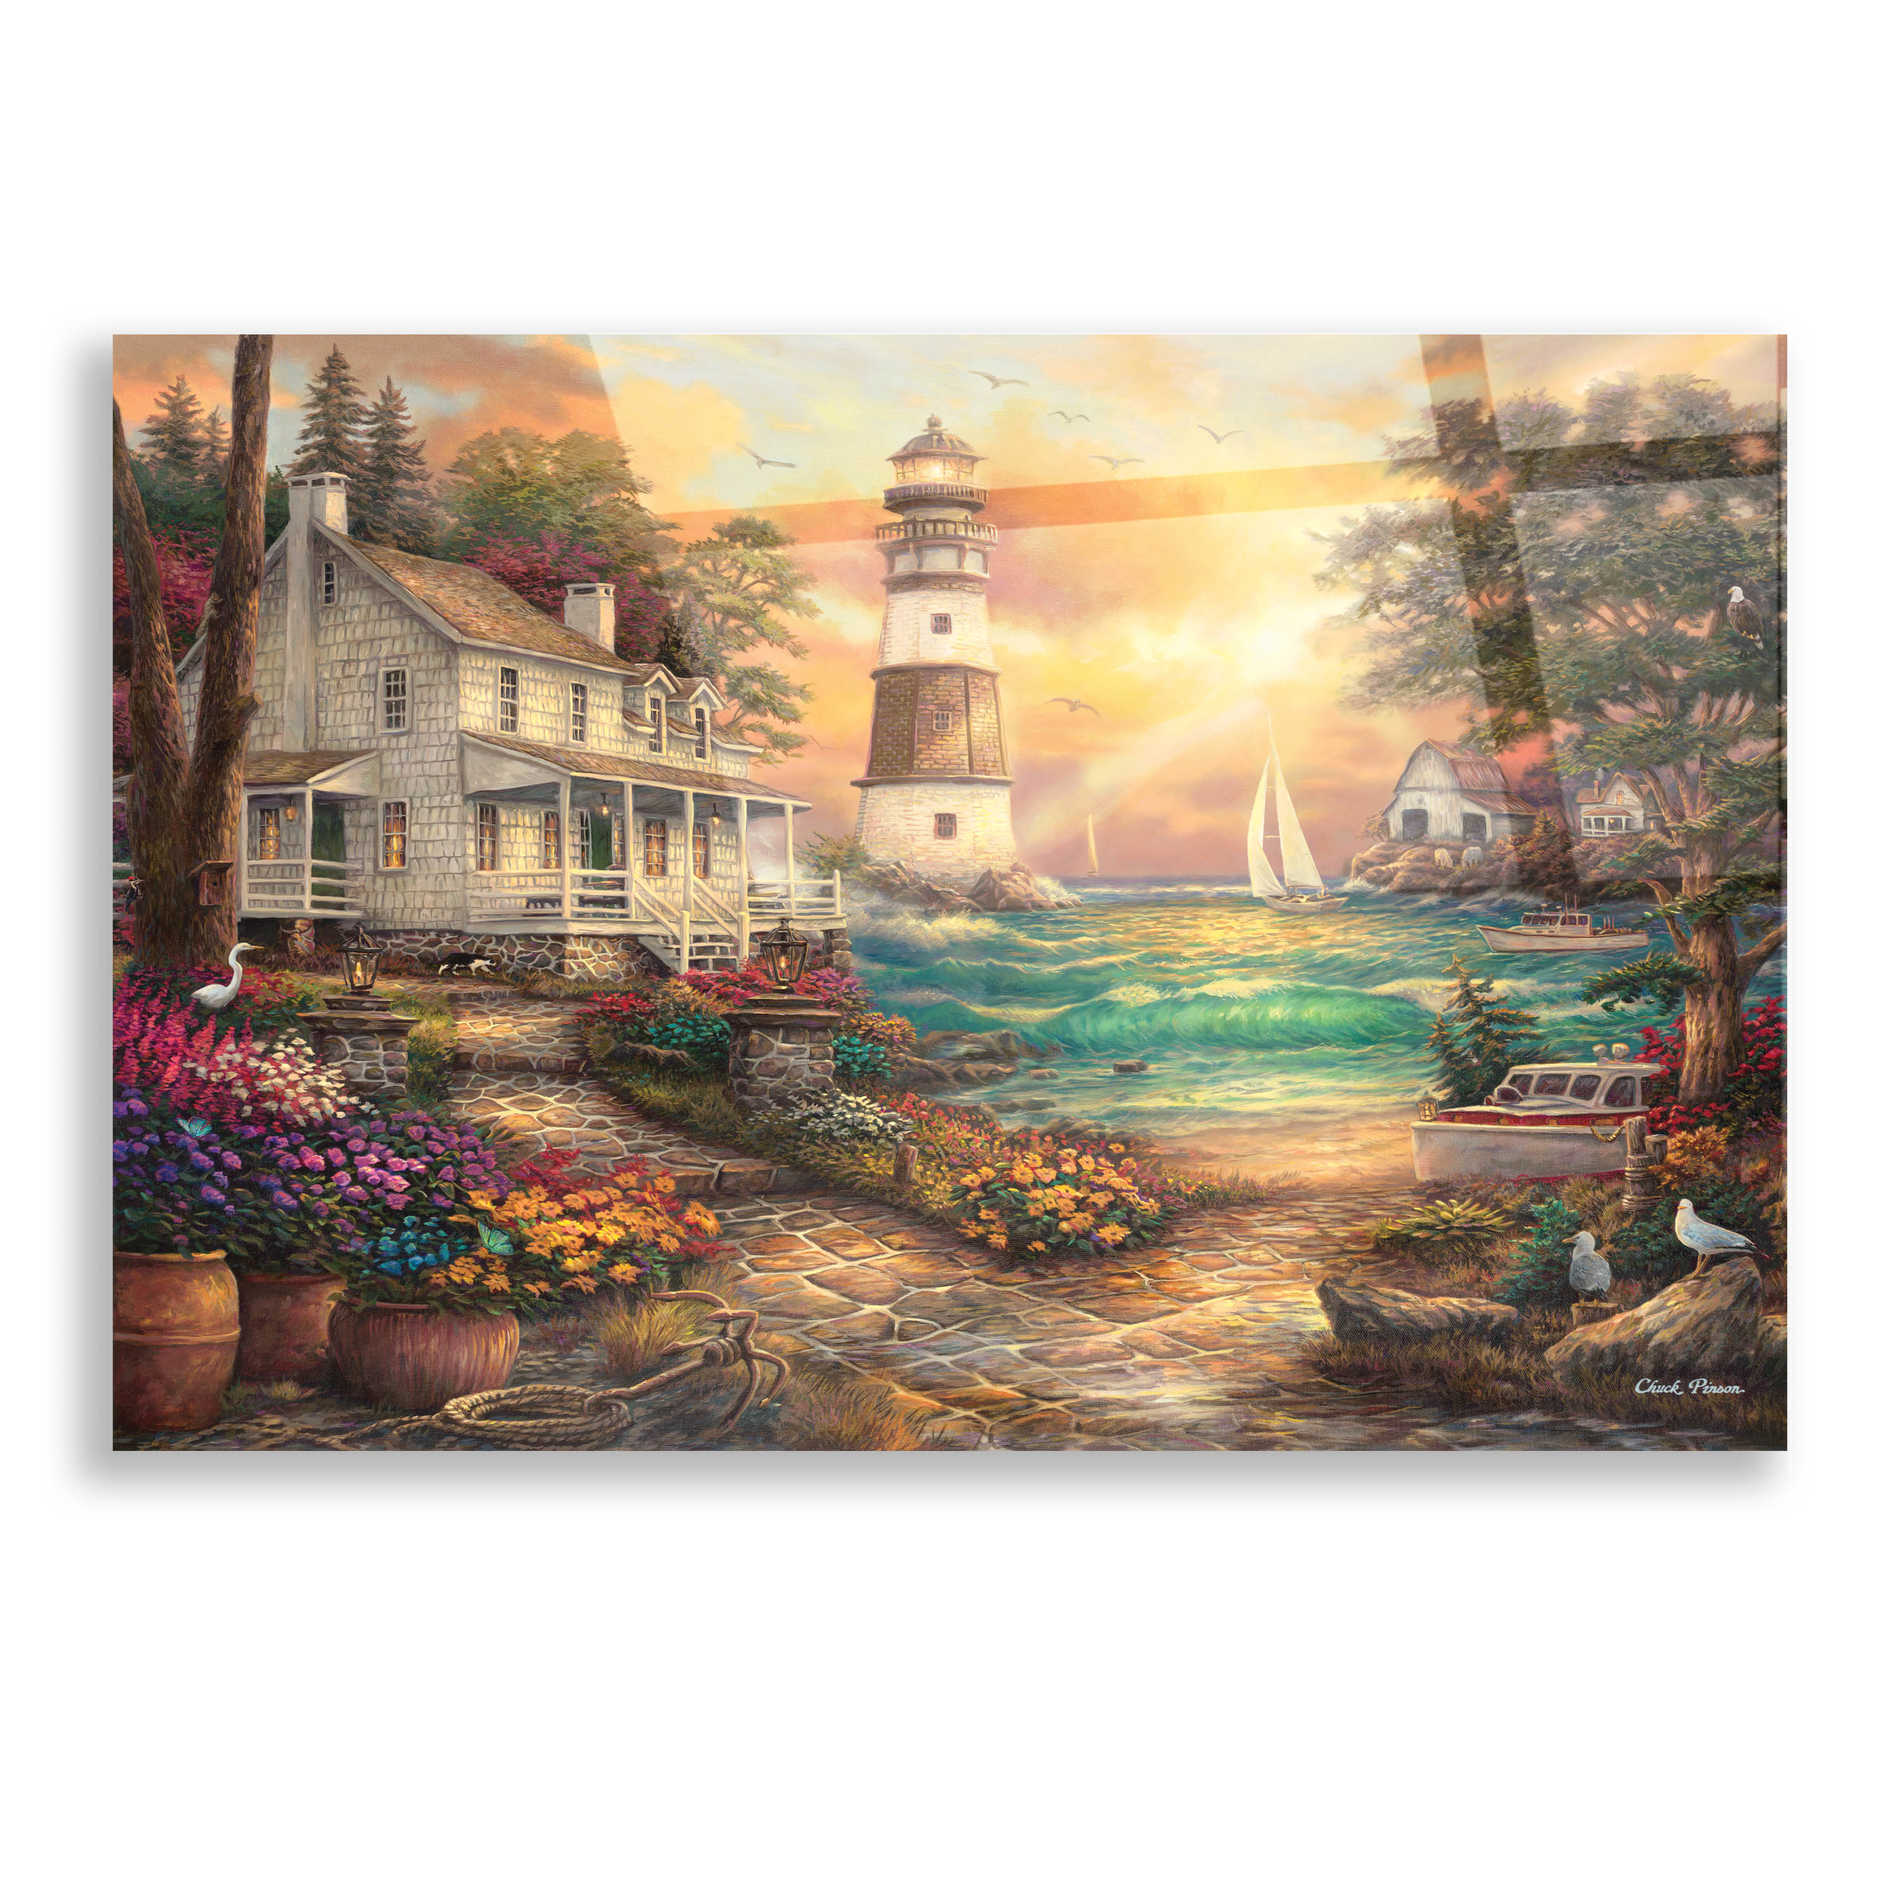 Epic Art 'Cottage by the Sea' by Chuck Pinson, Acrylic Glass Wall Art,16x12